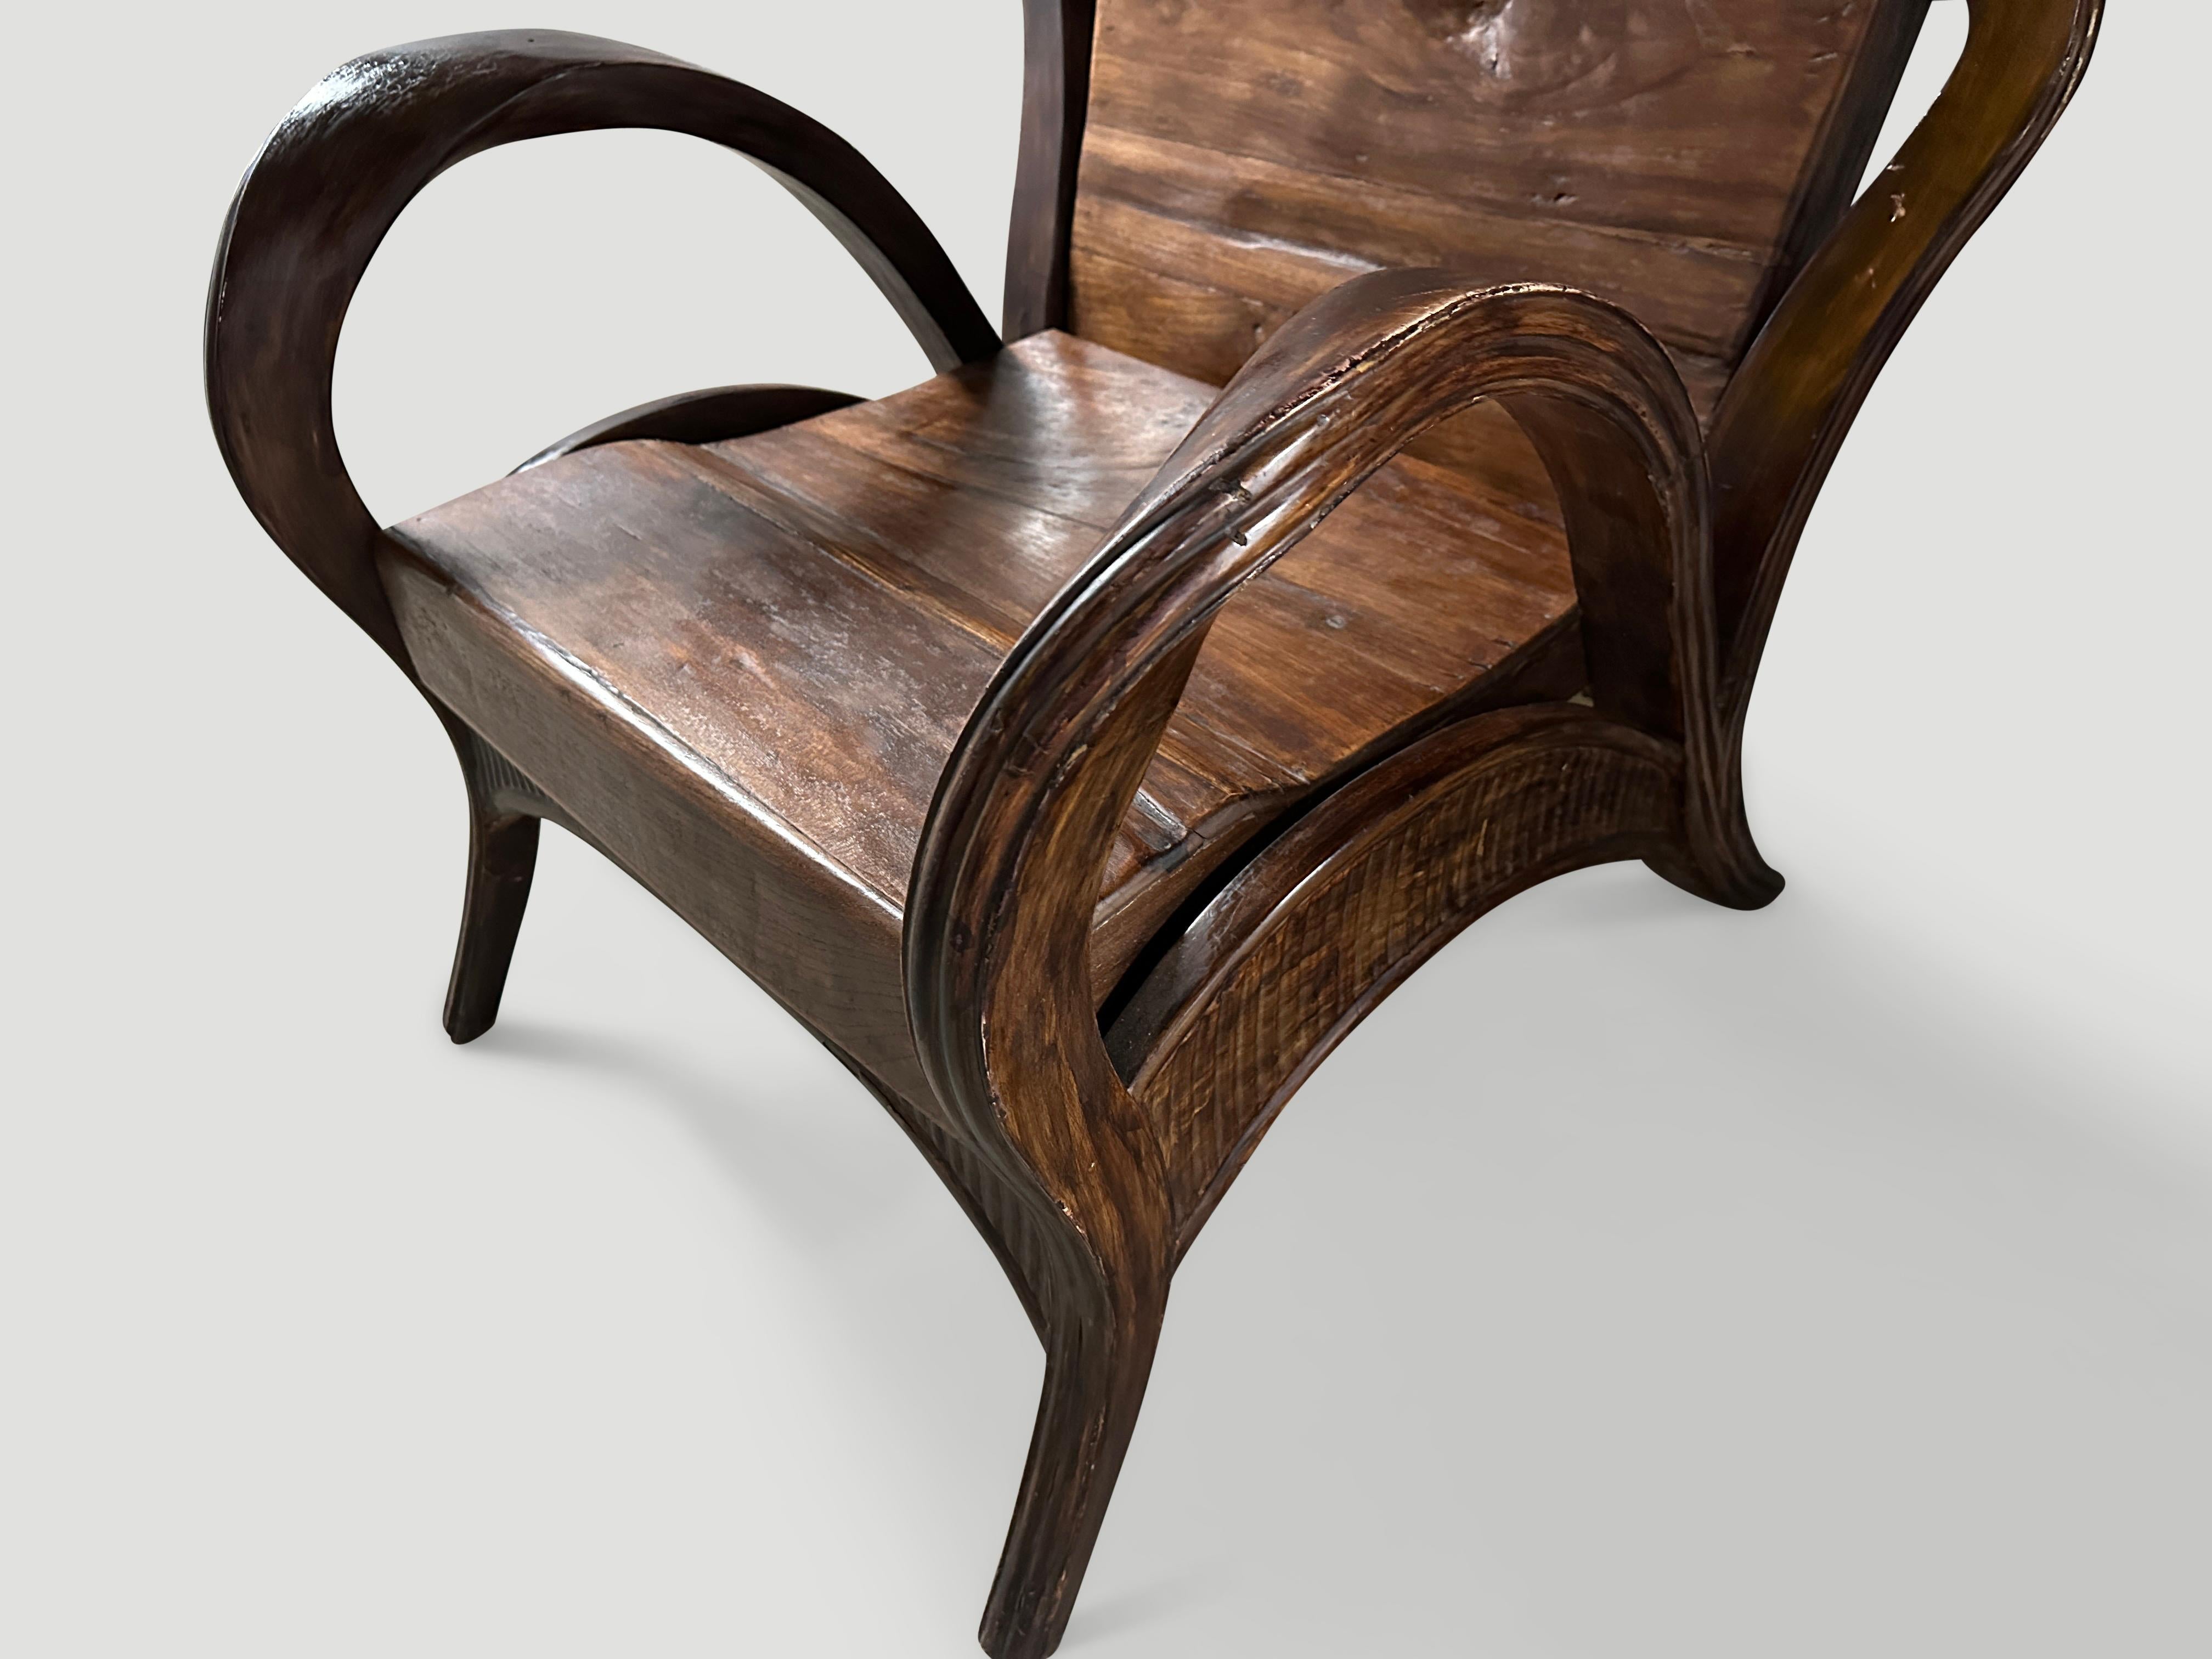 Andrianna Shamaris Sculptural Antique Teak Wood Arm Chair In Excellent Condition For Sale In New York, NY